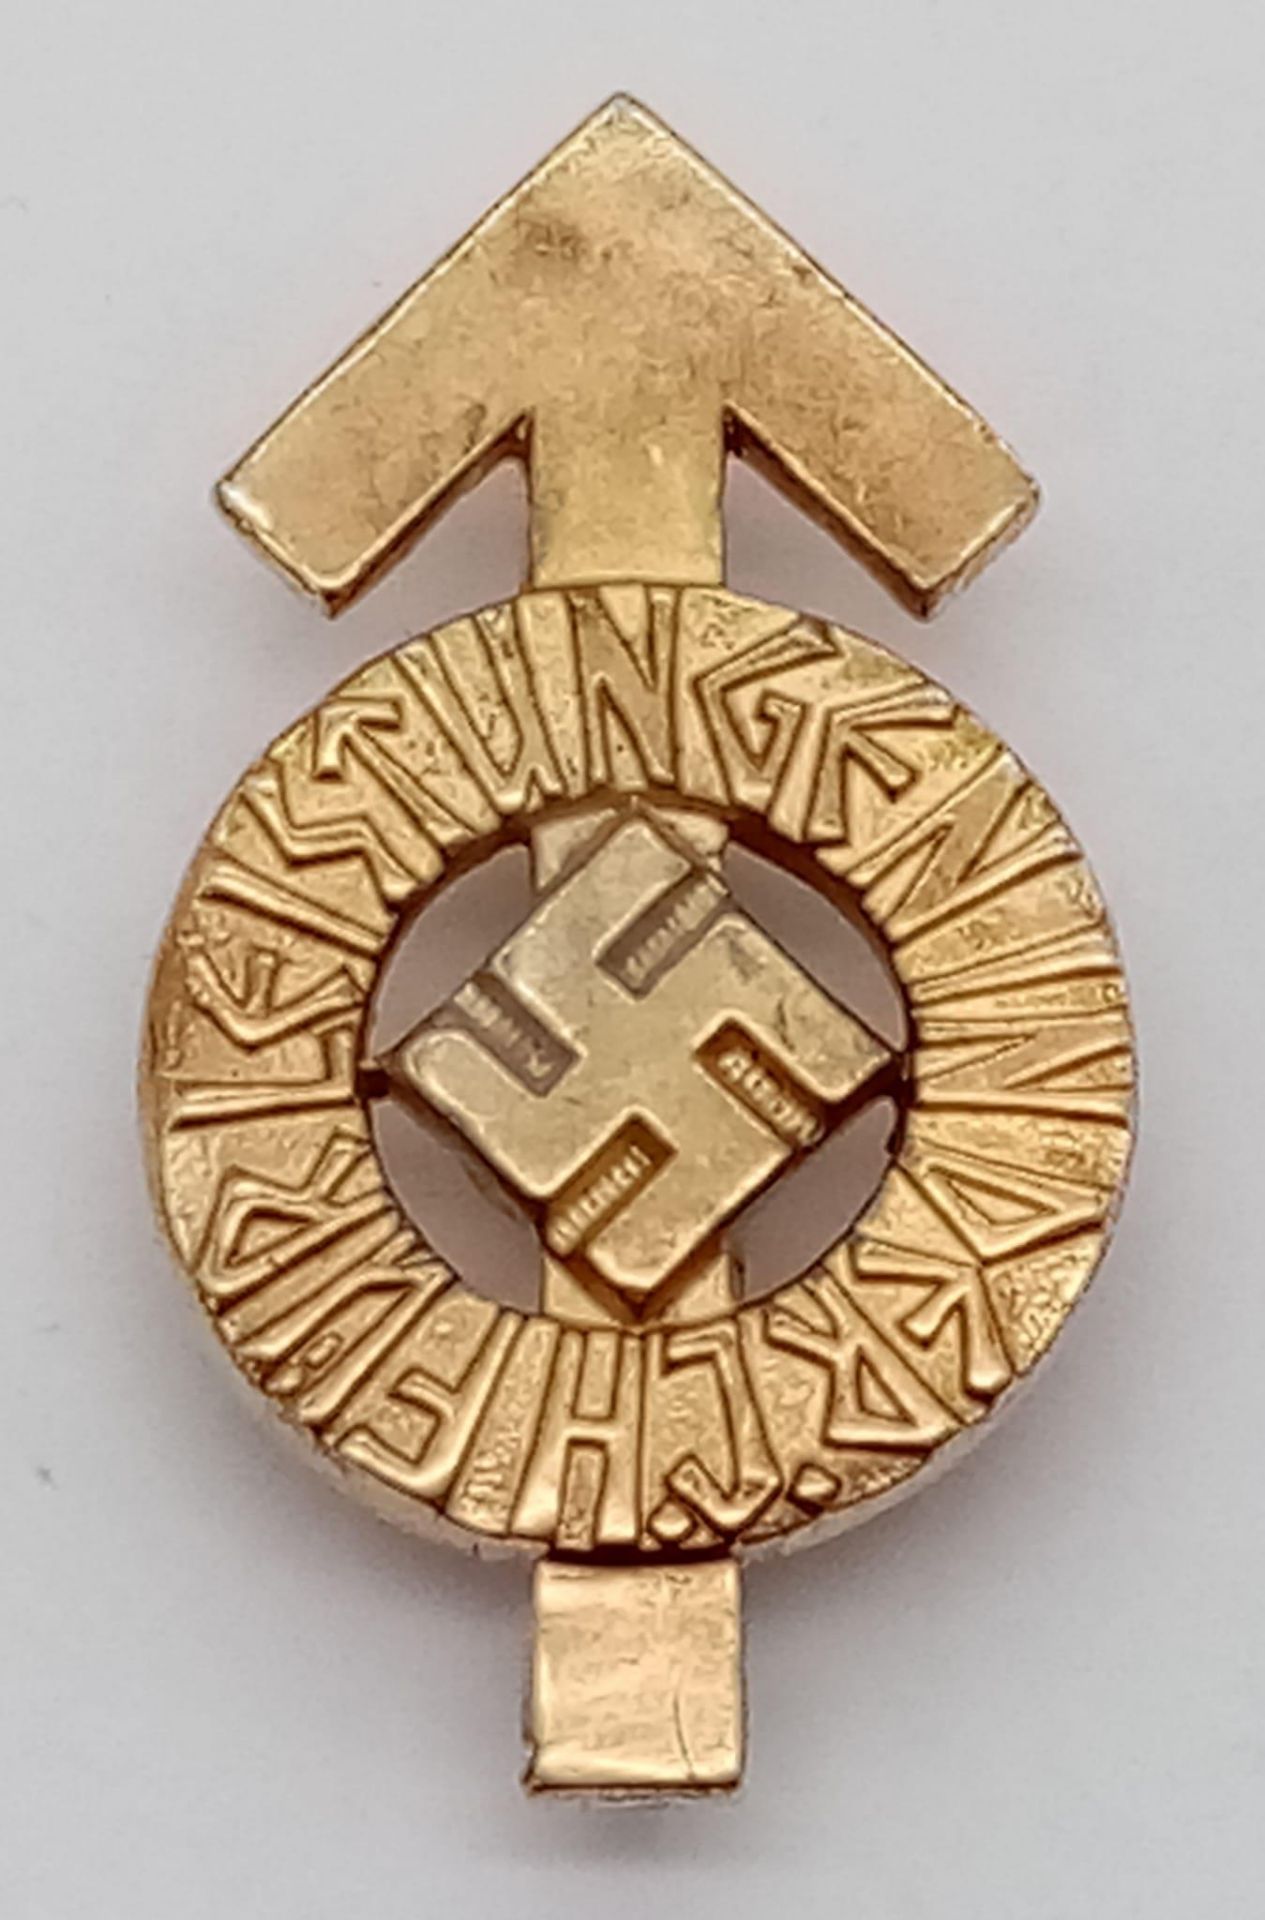 3rd Reich Hitler Youth Gold Grade “Leistungsabzeichen” Proficiency Badge. Serial Number on the rear.